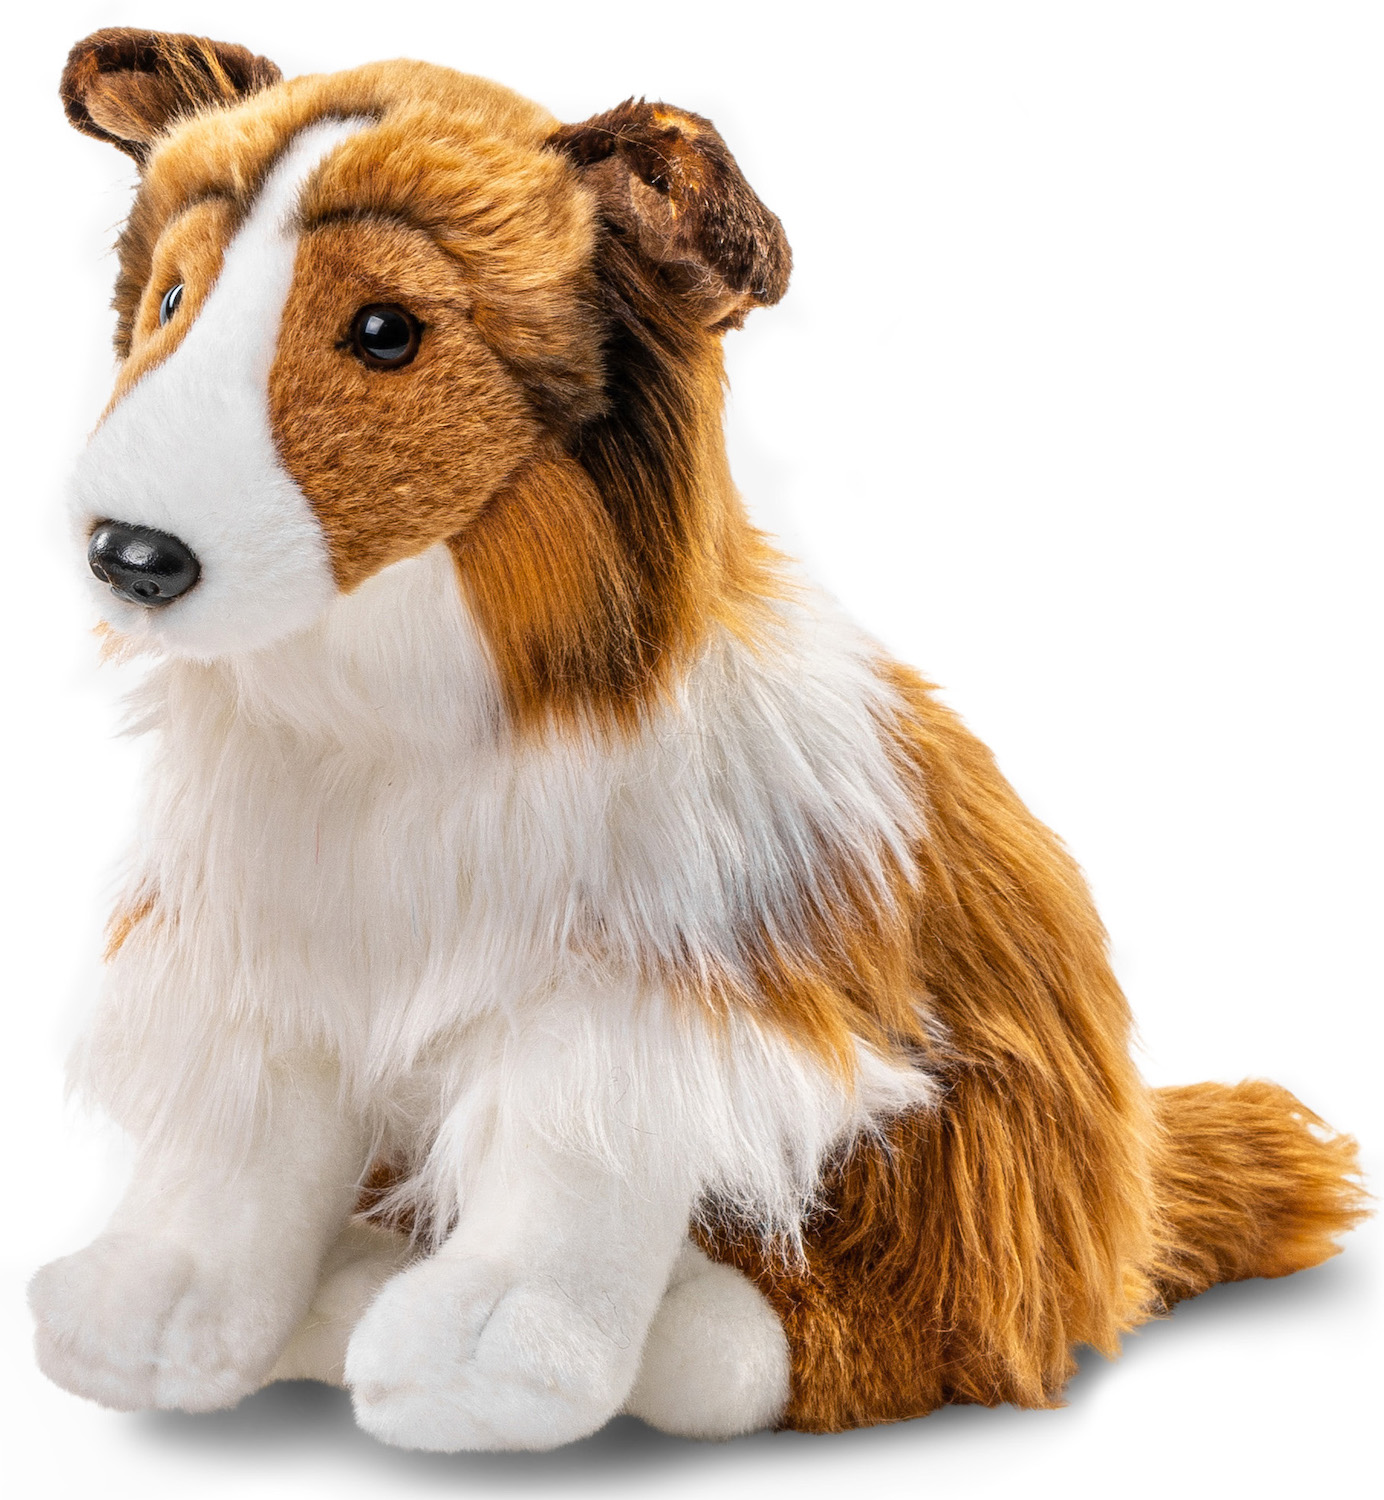 Rough Collie, Sitting - White-Brown Face - 27 cm (height) - Plush Dog, Collie, Pet - Stuffed Animal, Cuddly Toy